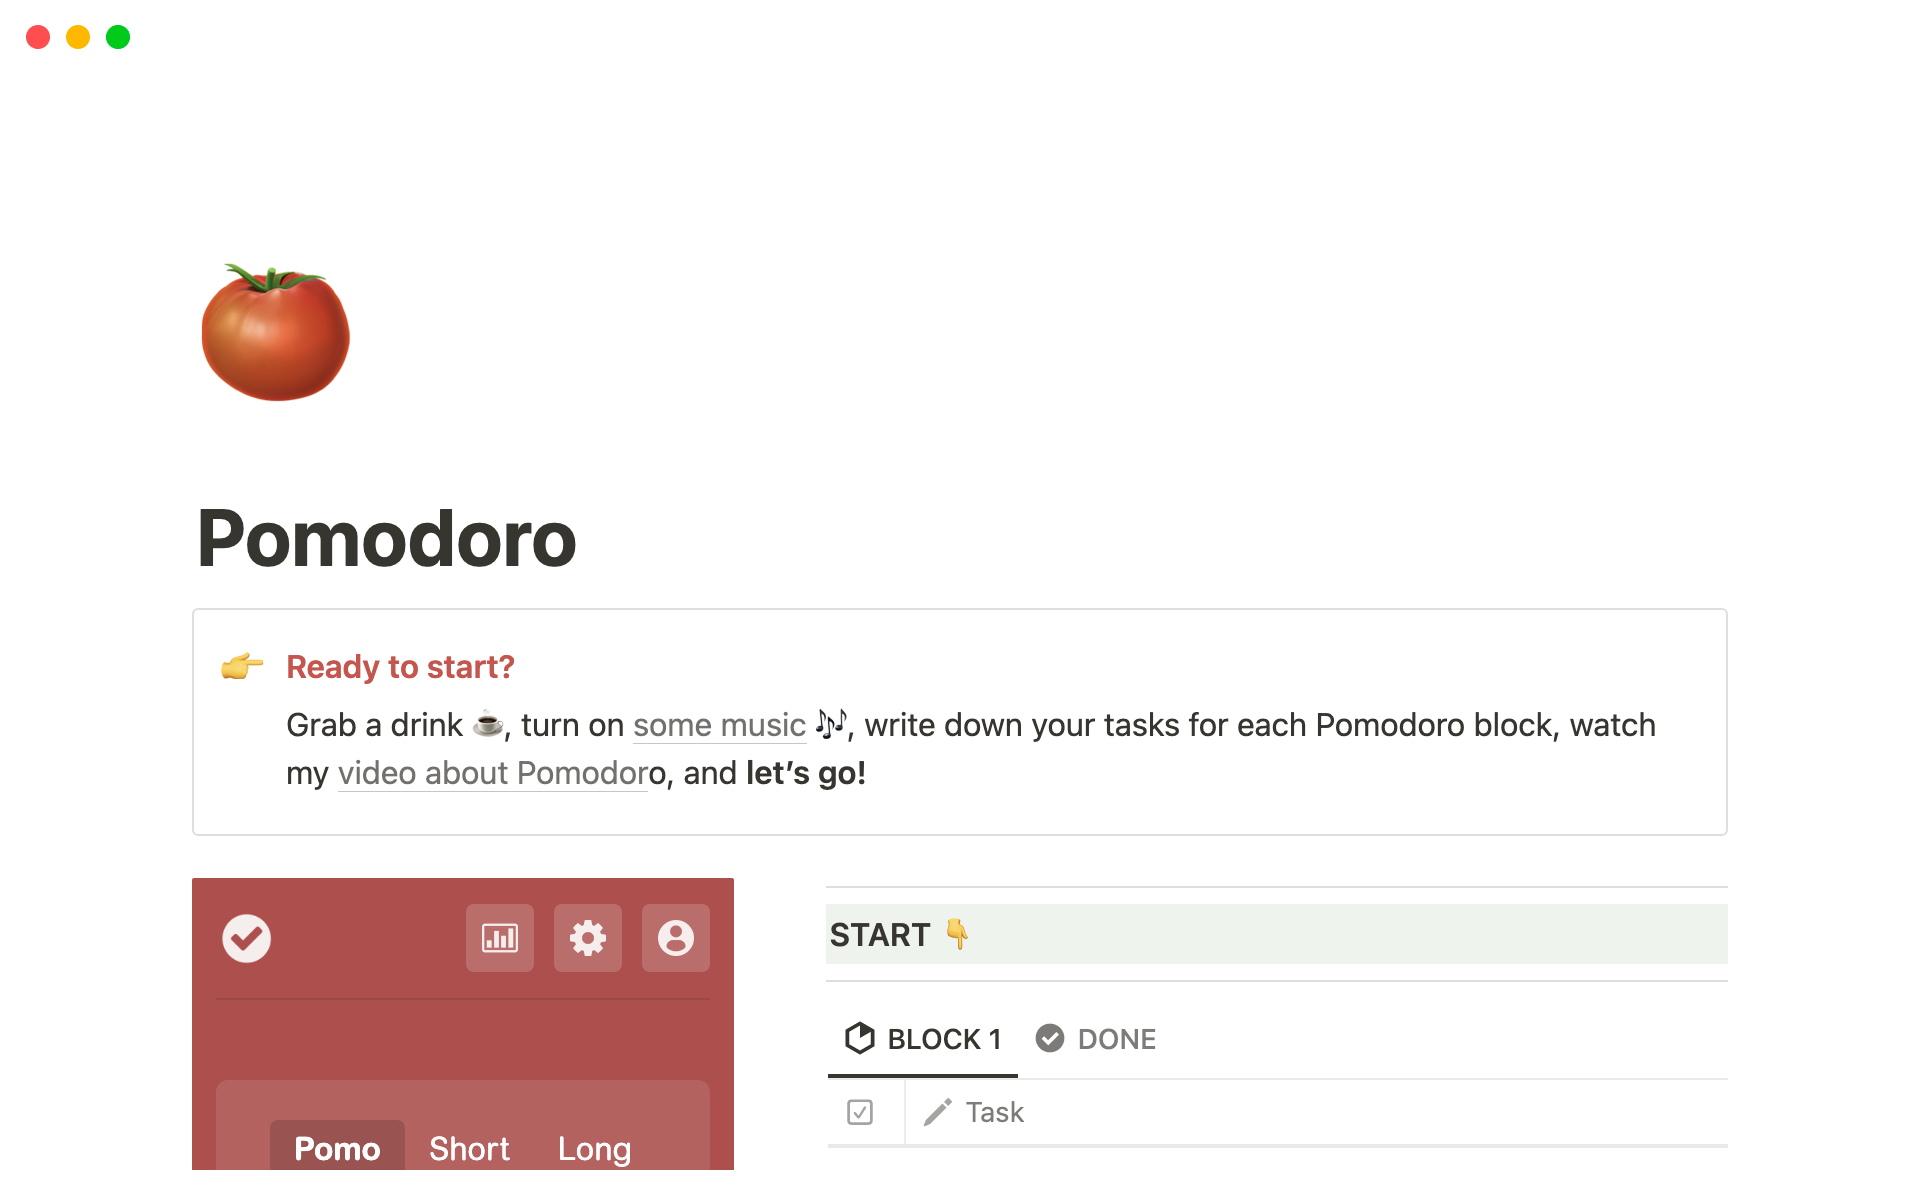 Work more efficiently on your tasks and todos with Pomodoro.